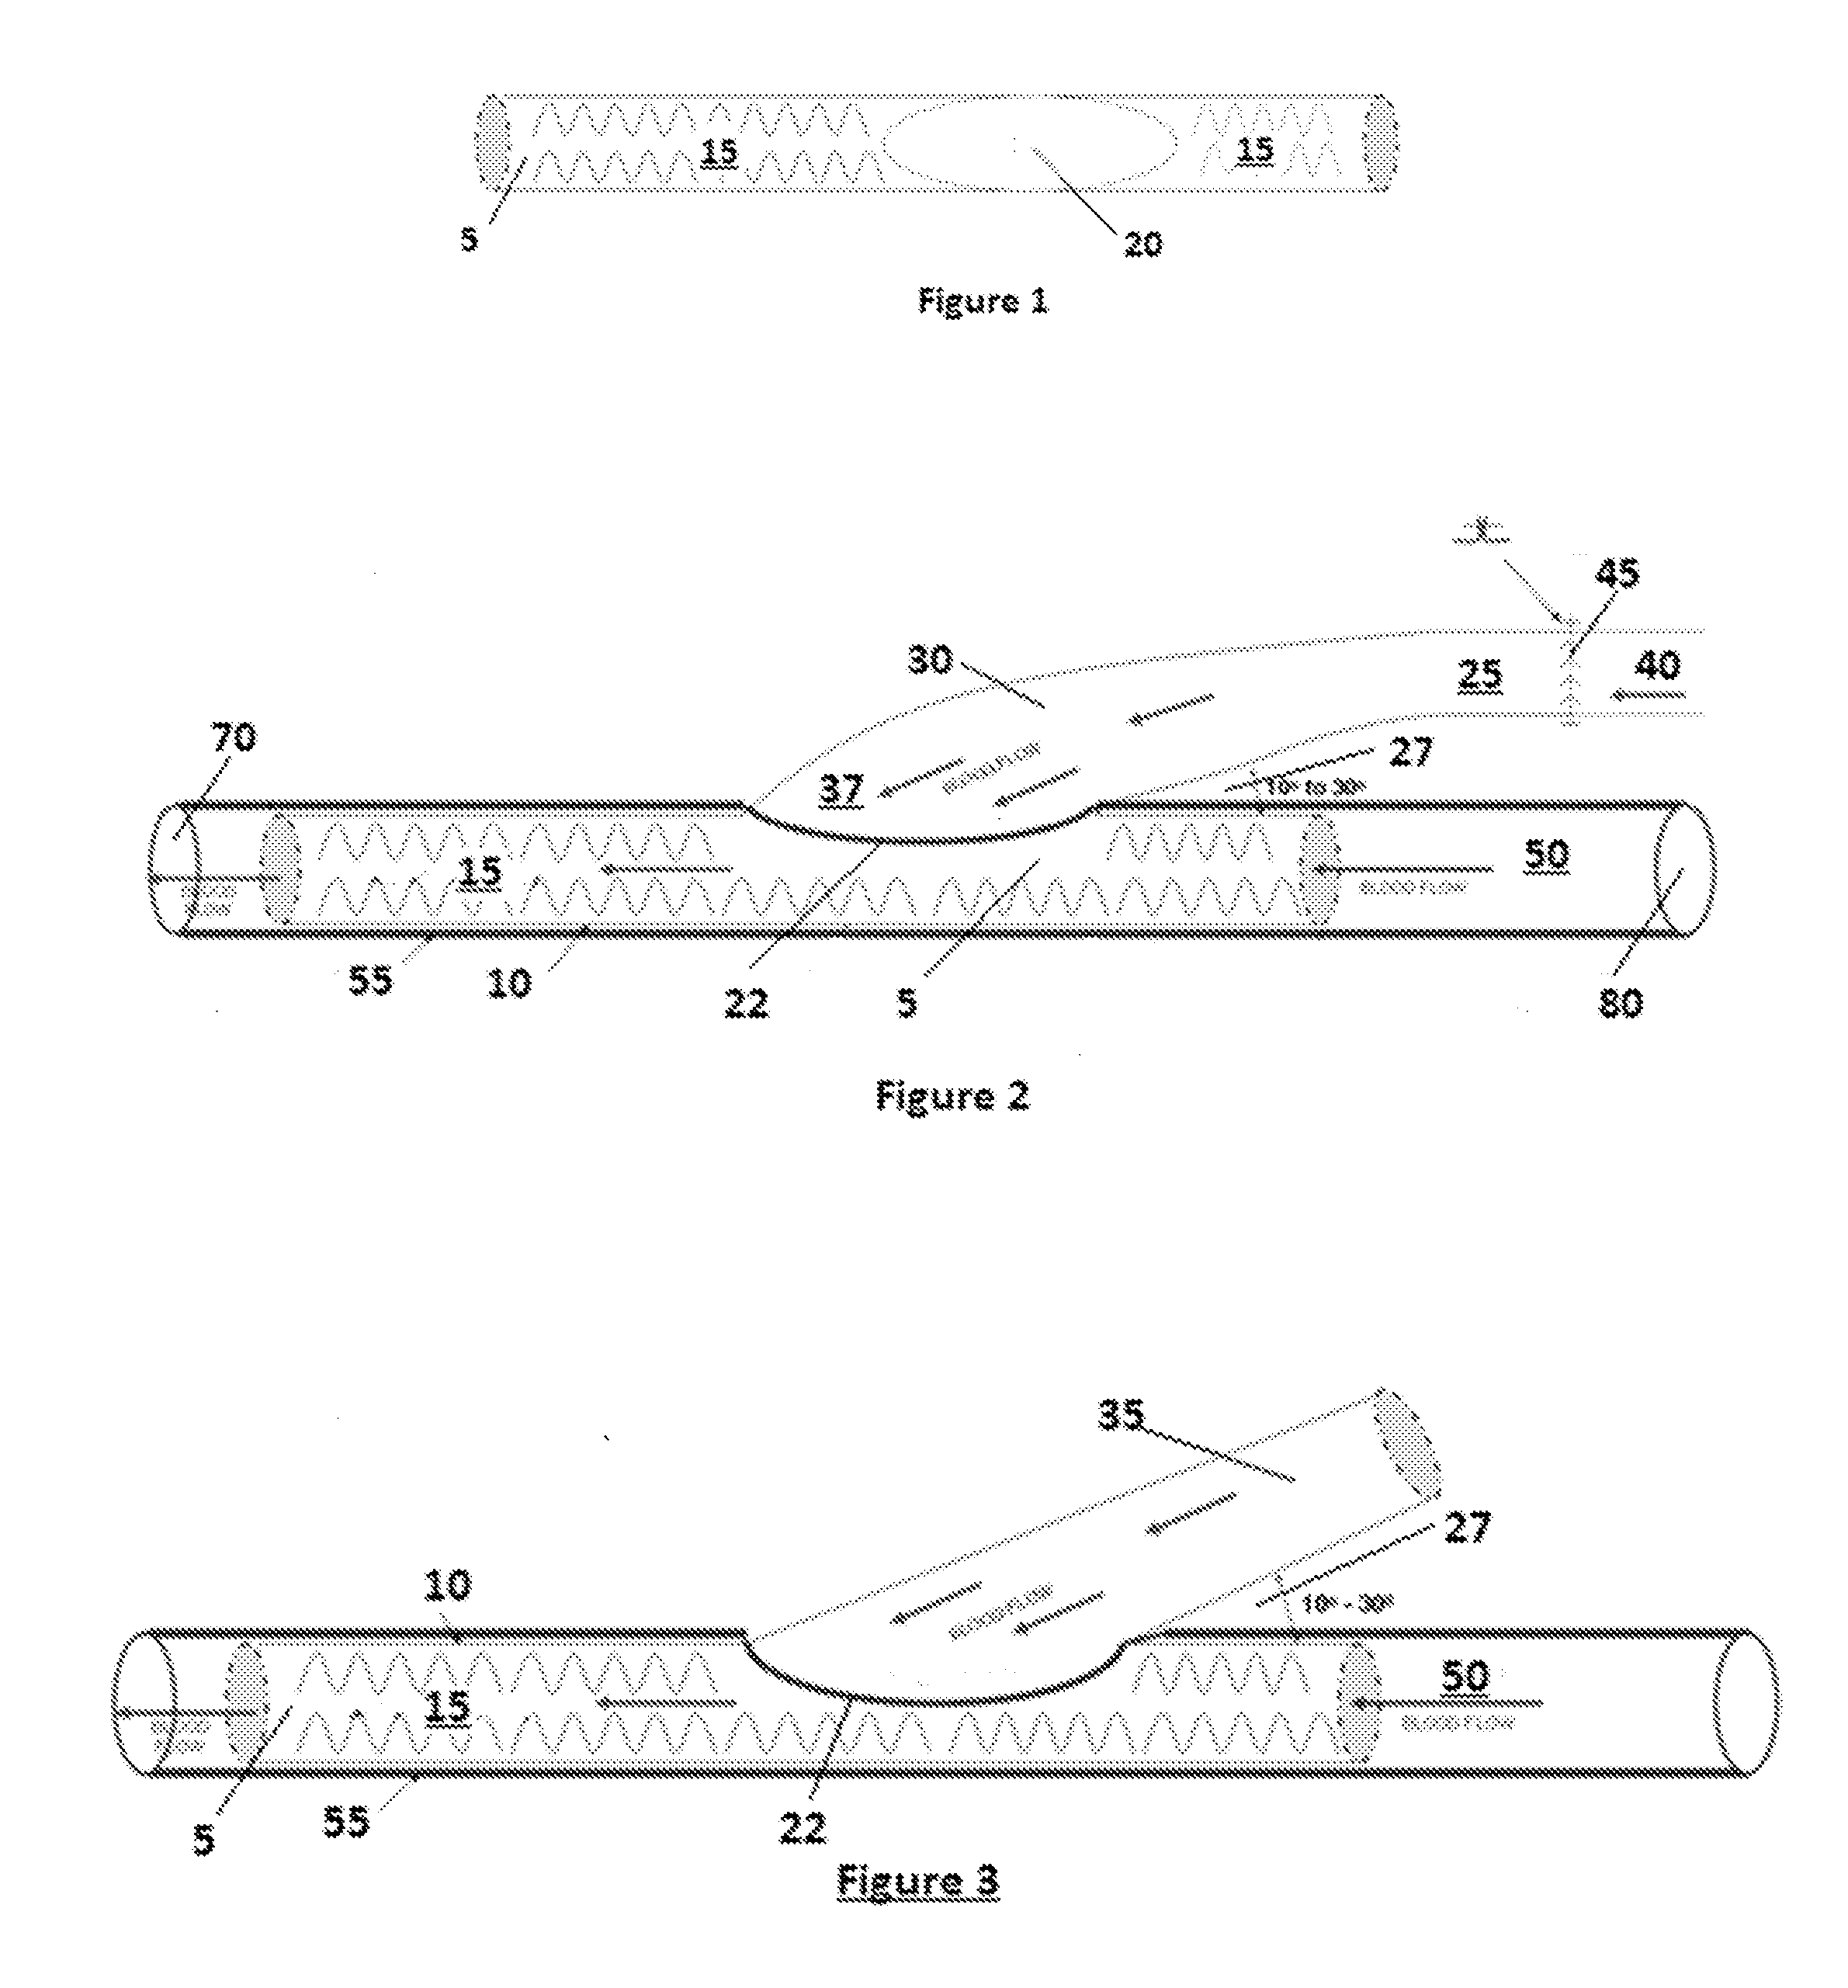 Device and method to prevent or treat outflow vein stenosis of an arteriovenous fistula constructed with a synthetic vascular graft